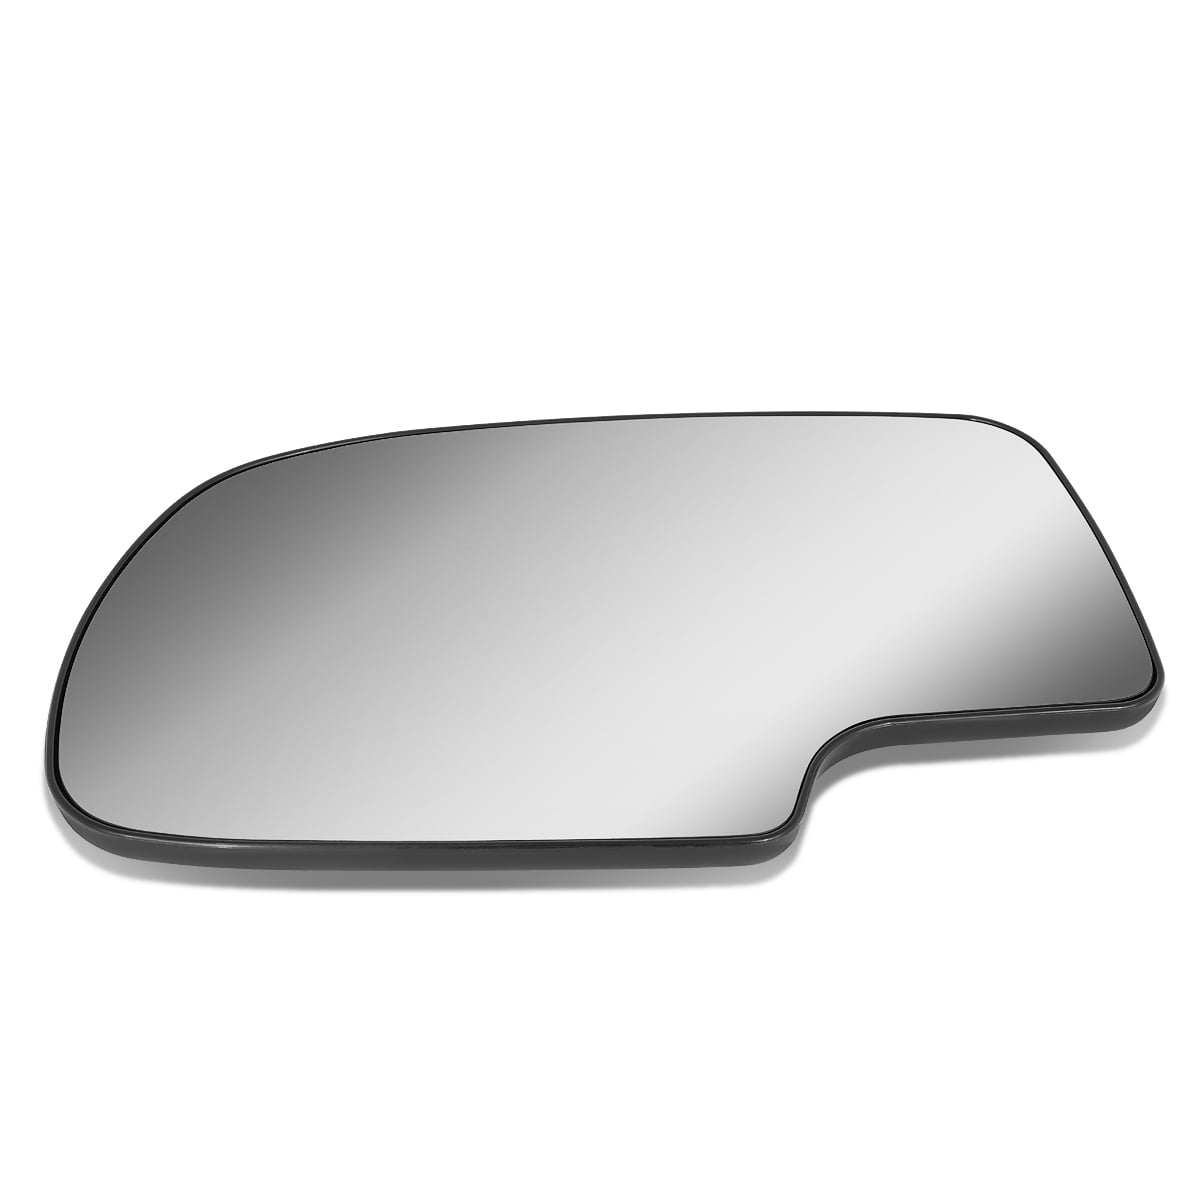 Driver/Left Side Door Rear View Mirror Glass Lens Replacement for 2000-2006 Chevy Silverado/Tahoe/GMC Sierra/Yukon 